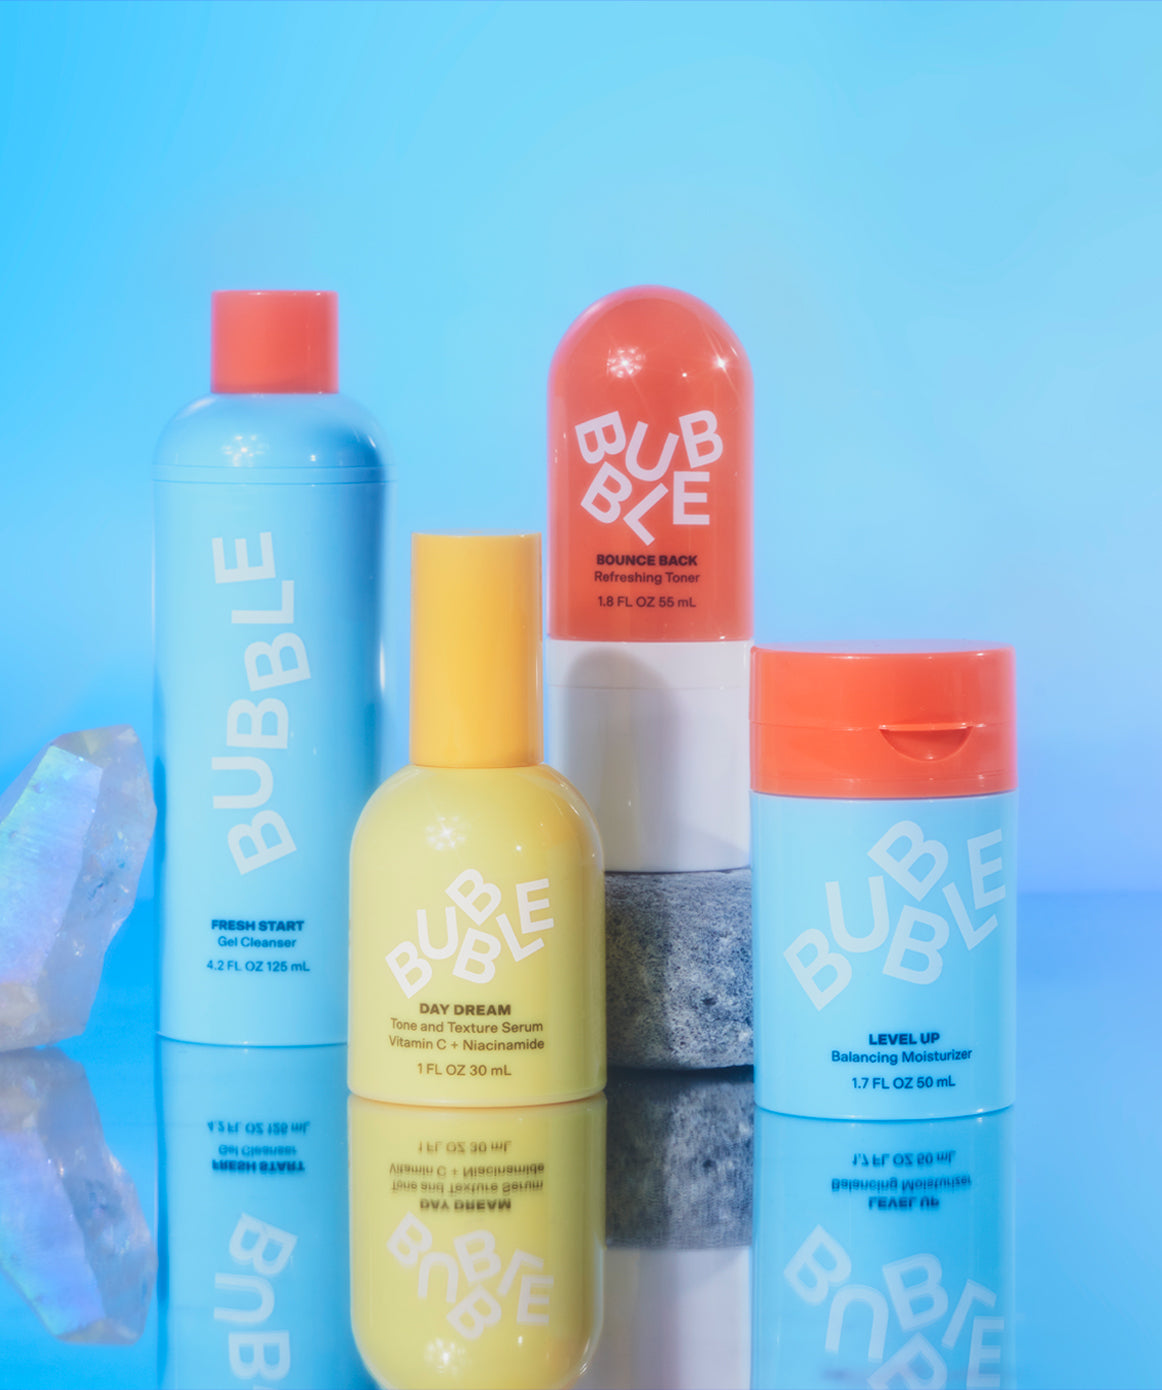 Aaaand the award for best gifter… - Bubble Skin Care